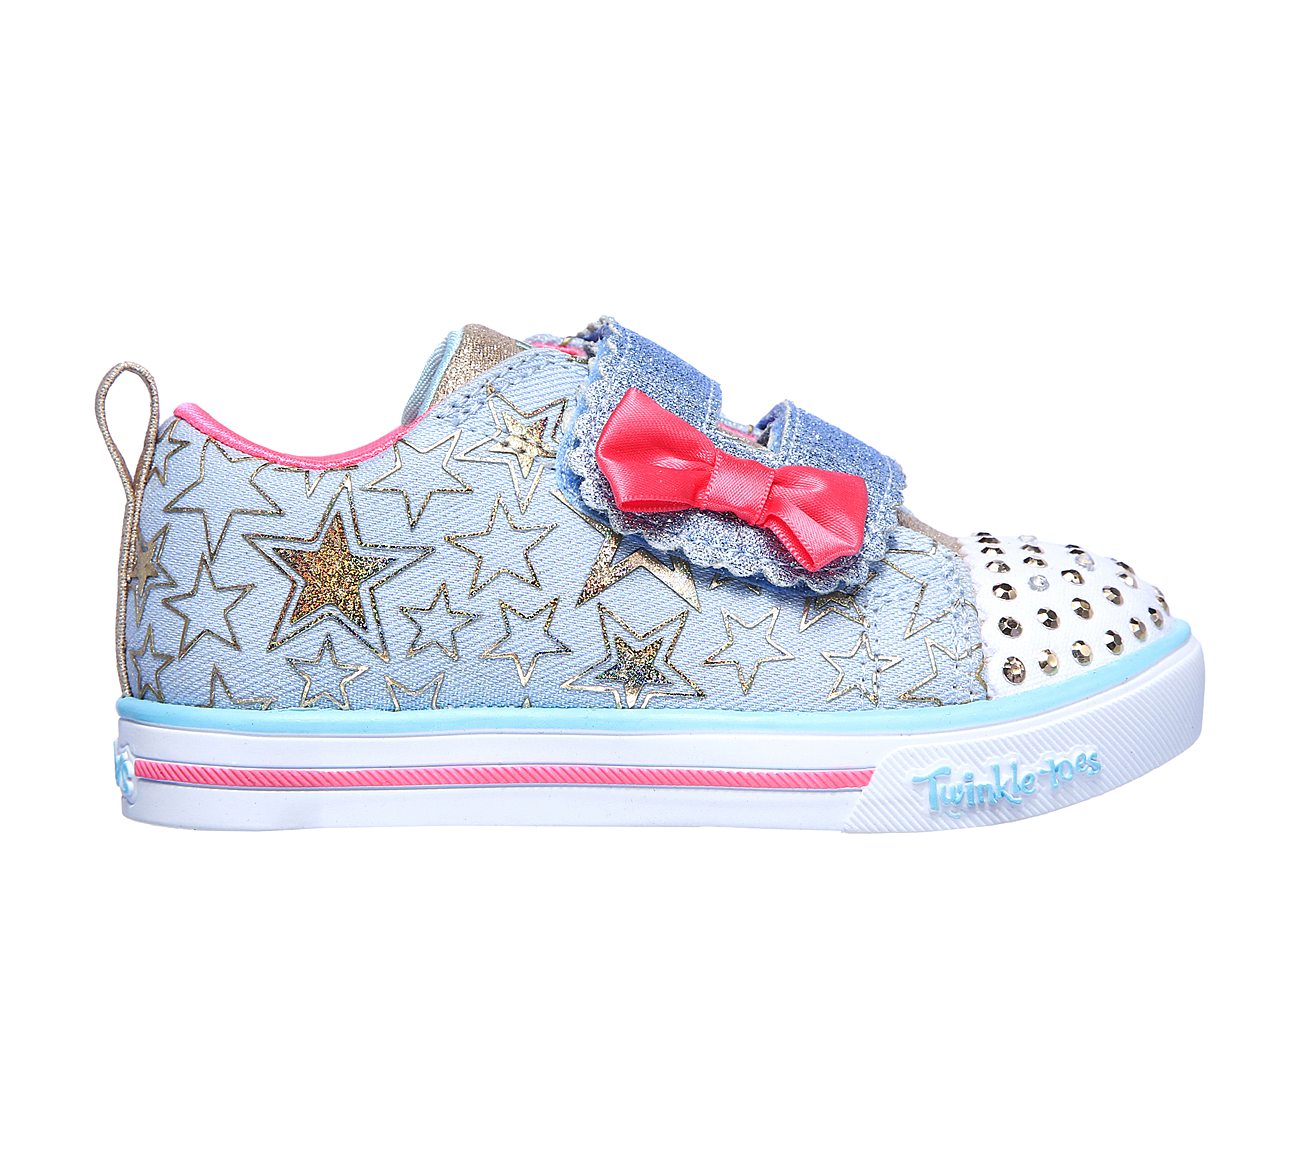 twinkle toes by skechers light up